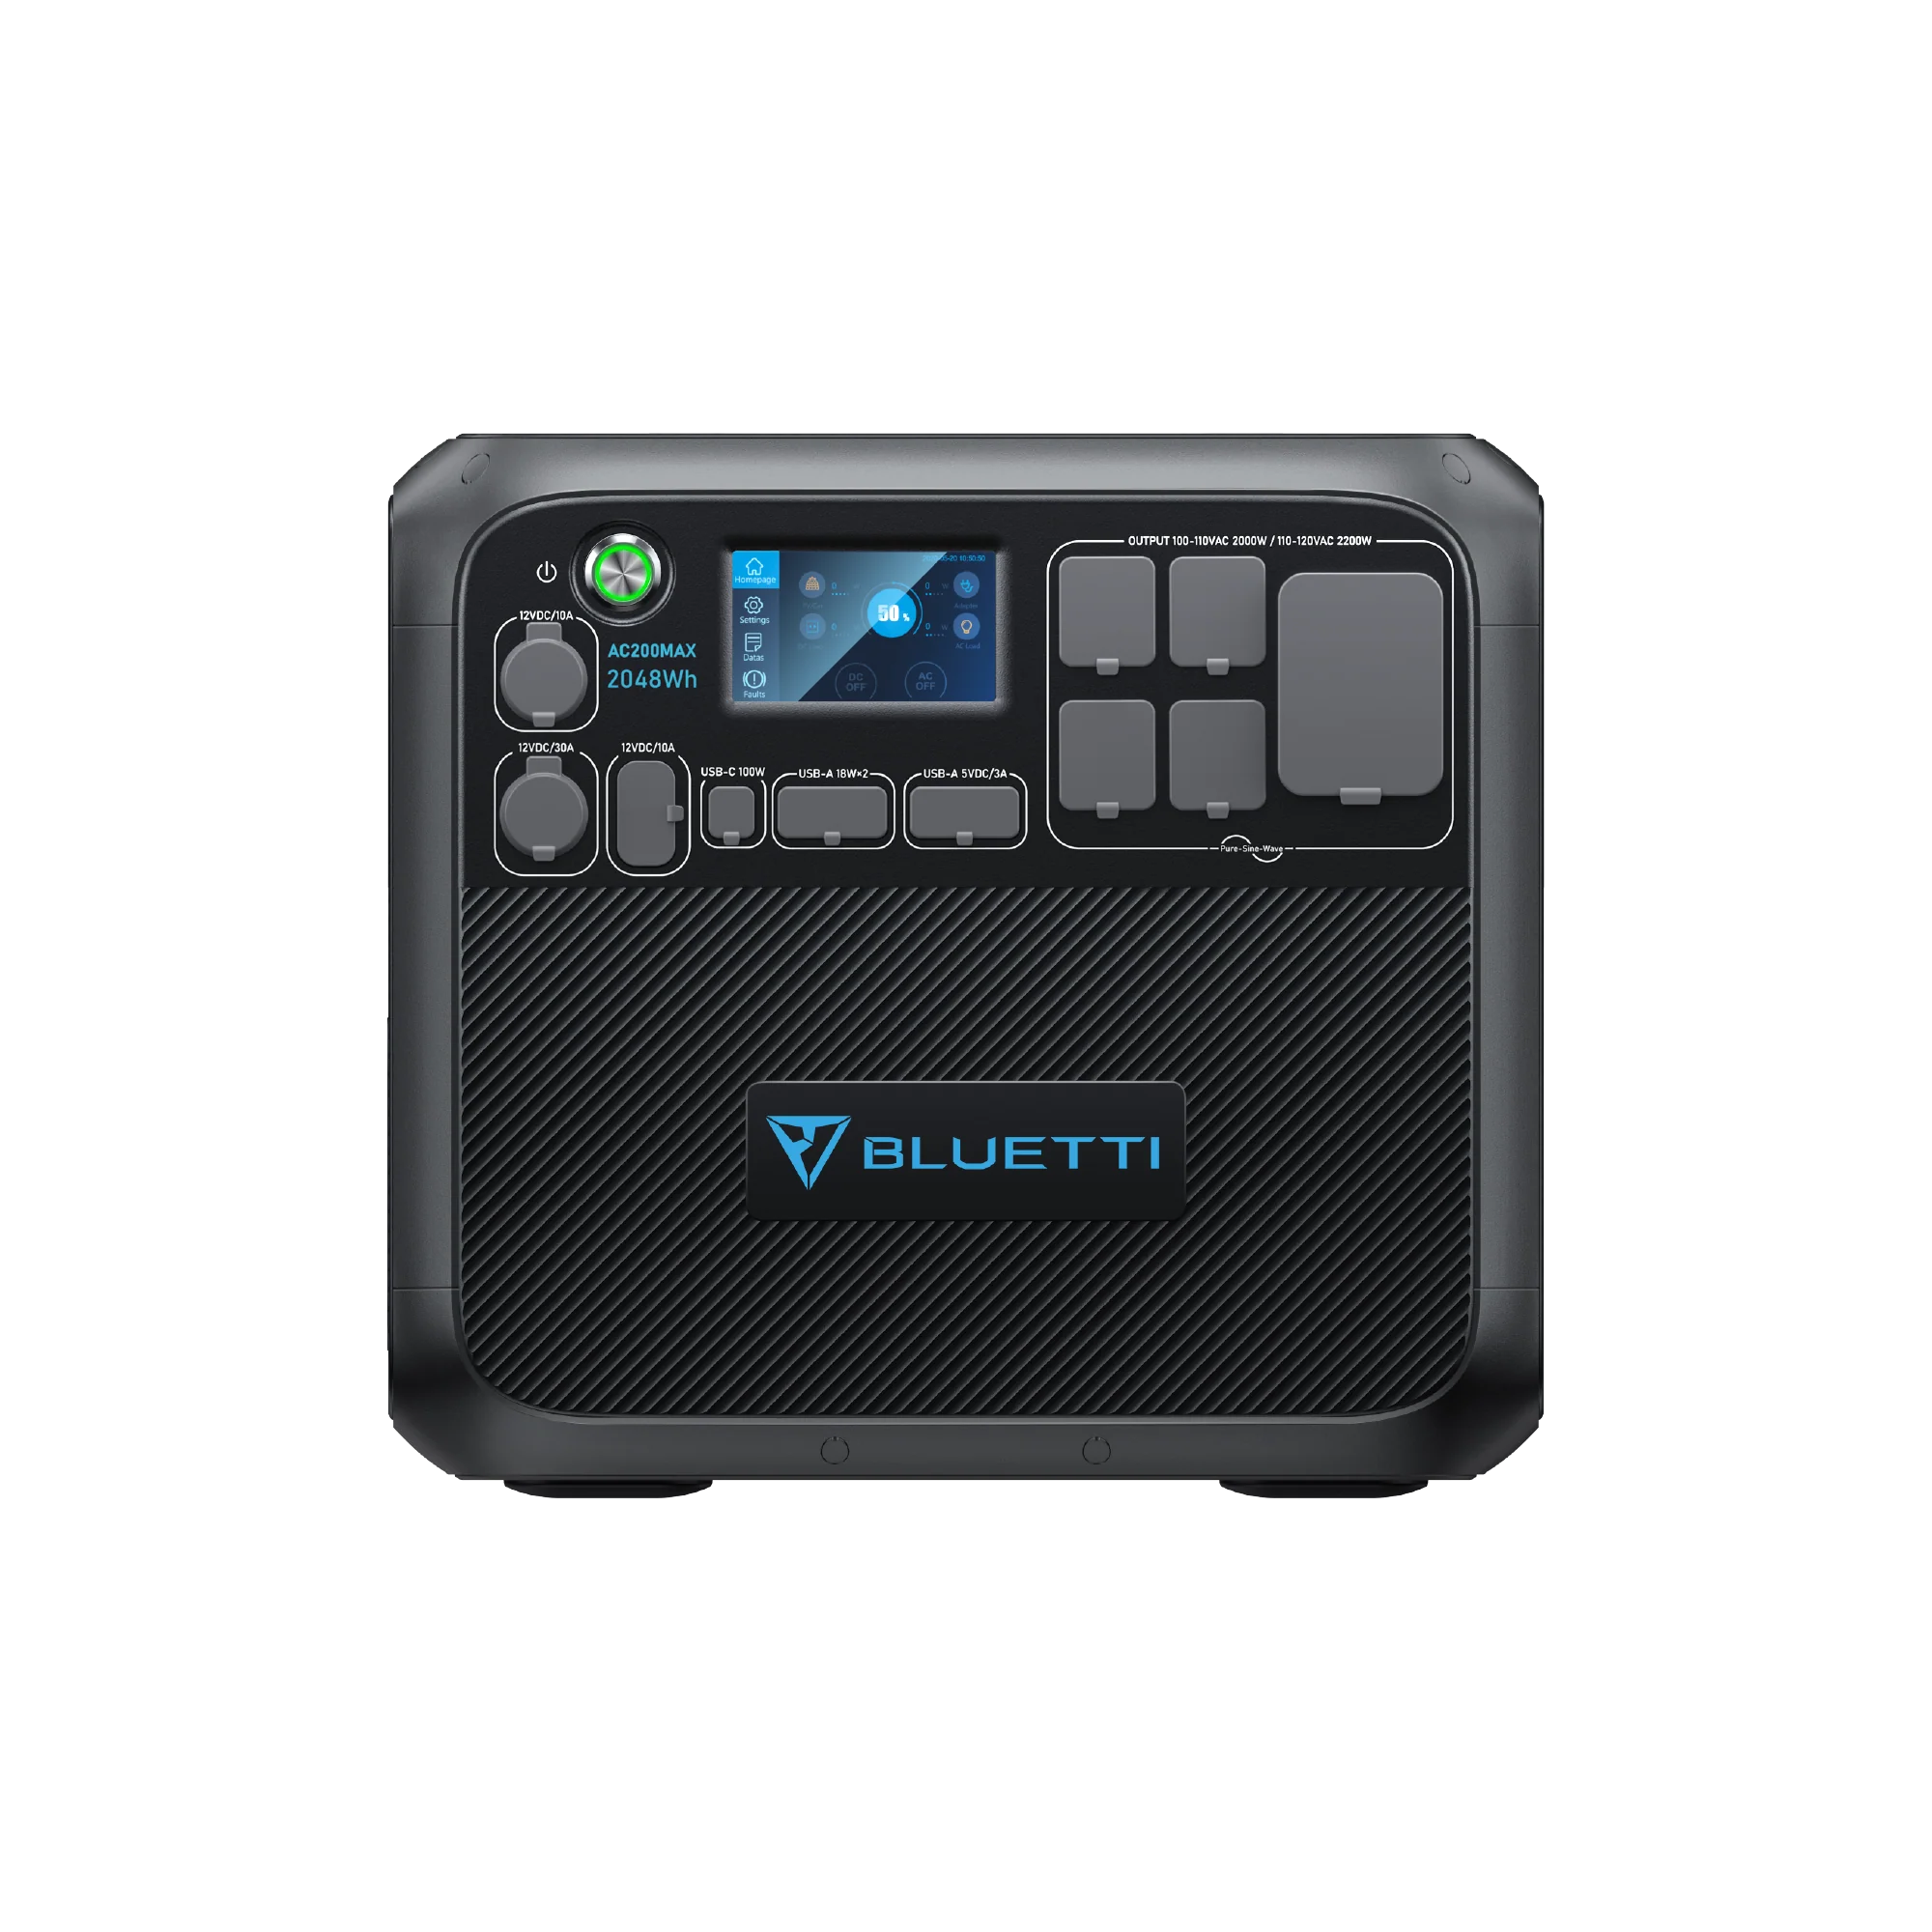 Bluetti EB3A Portable Power Station: Empower Your Adventures